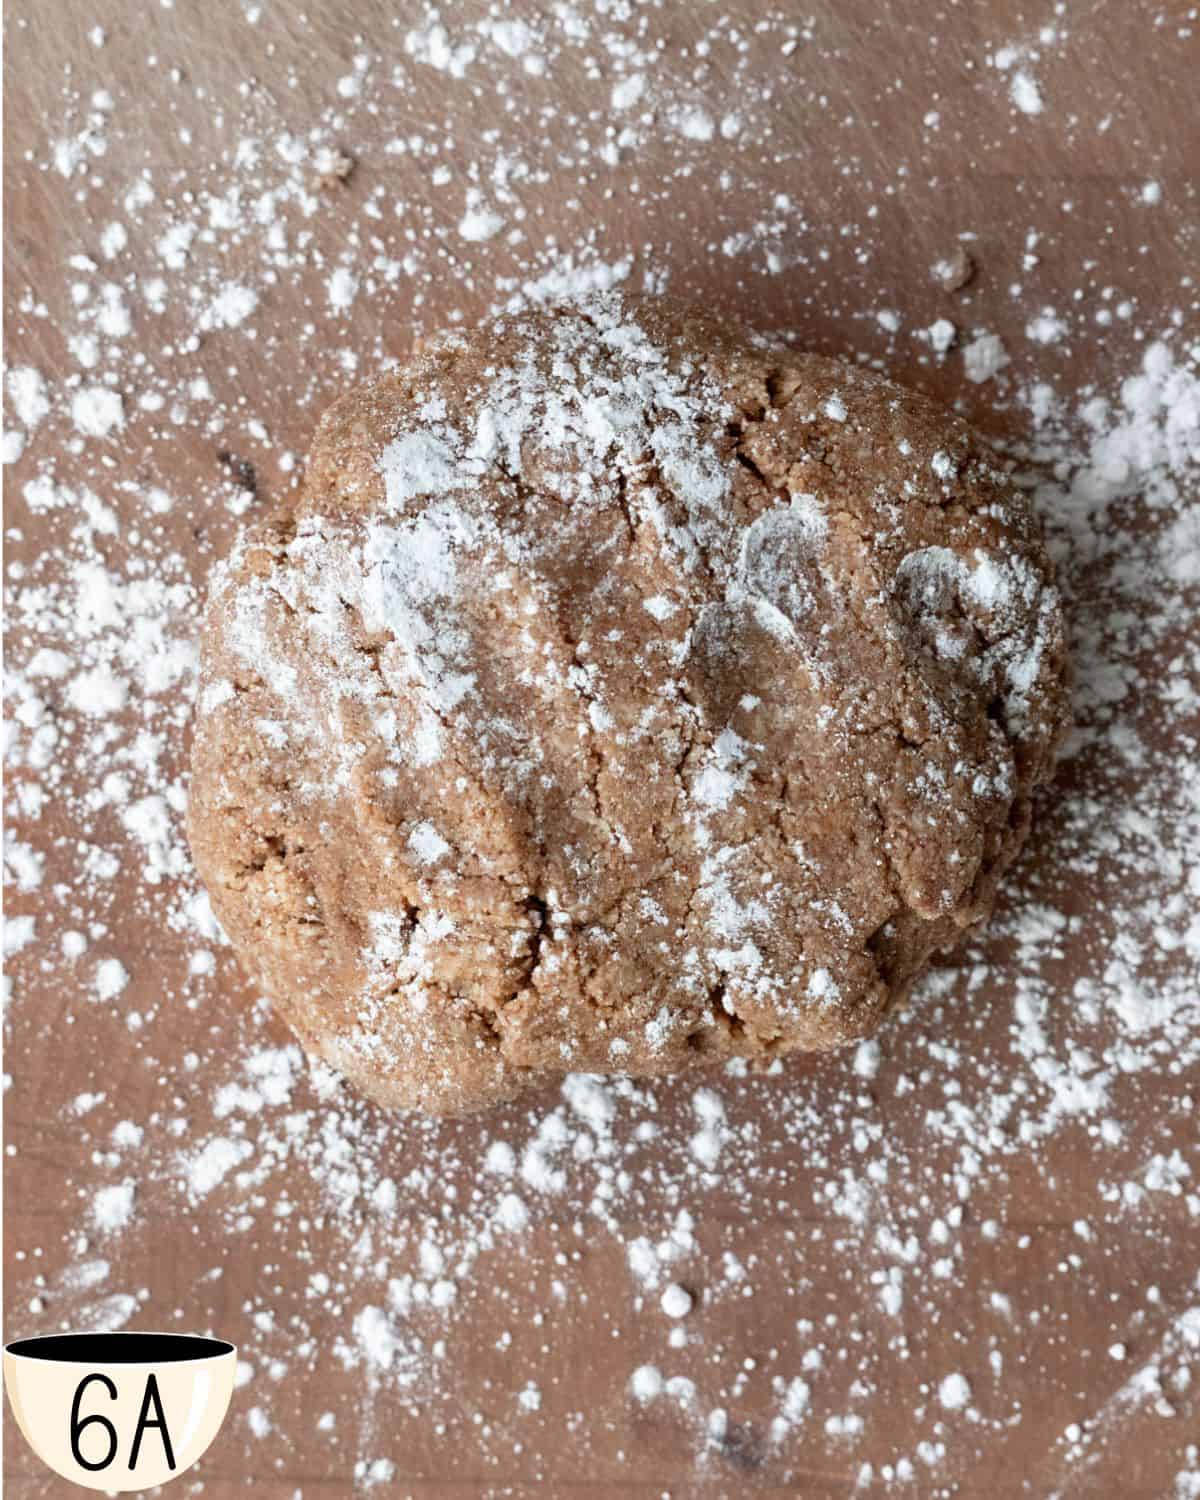 The vegan Zimtsterne dough on a surface, dusted with powdered sugar, ready to be rolled and cut into cookie shapes.